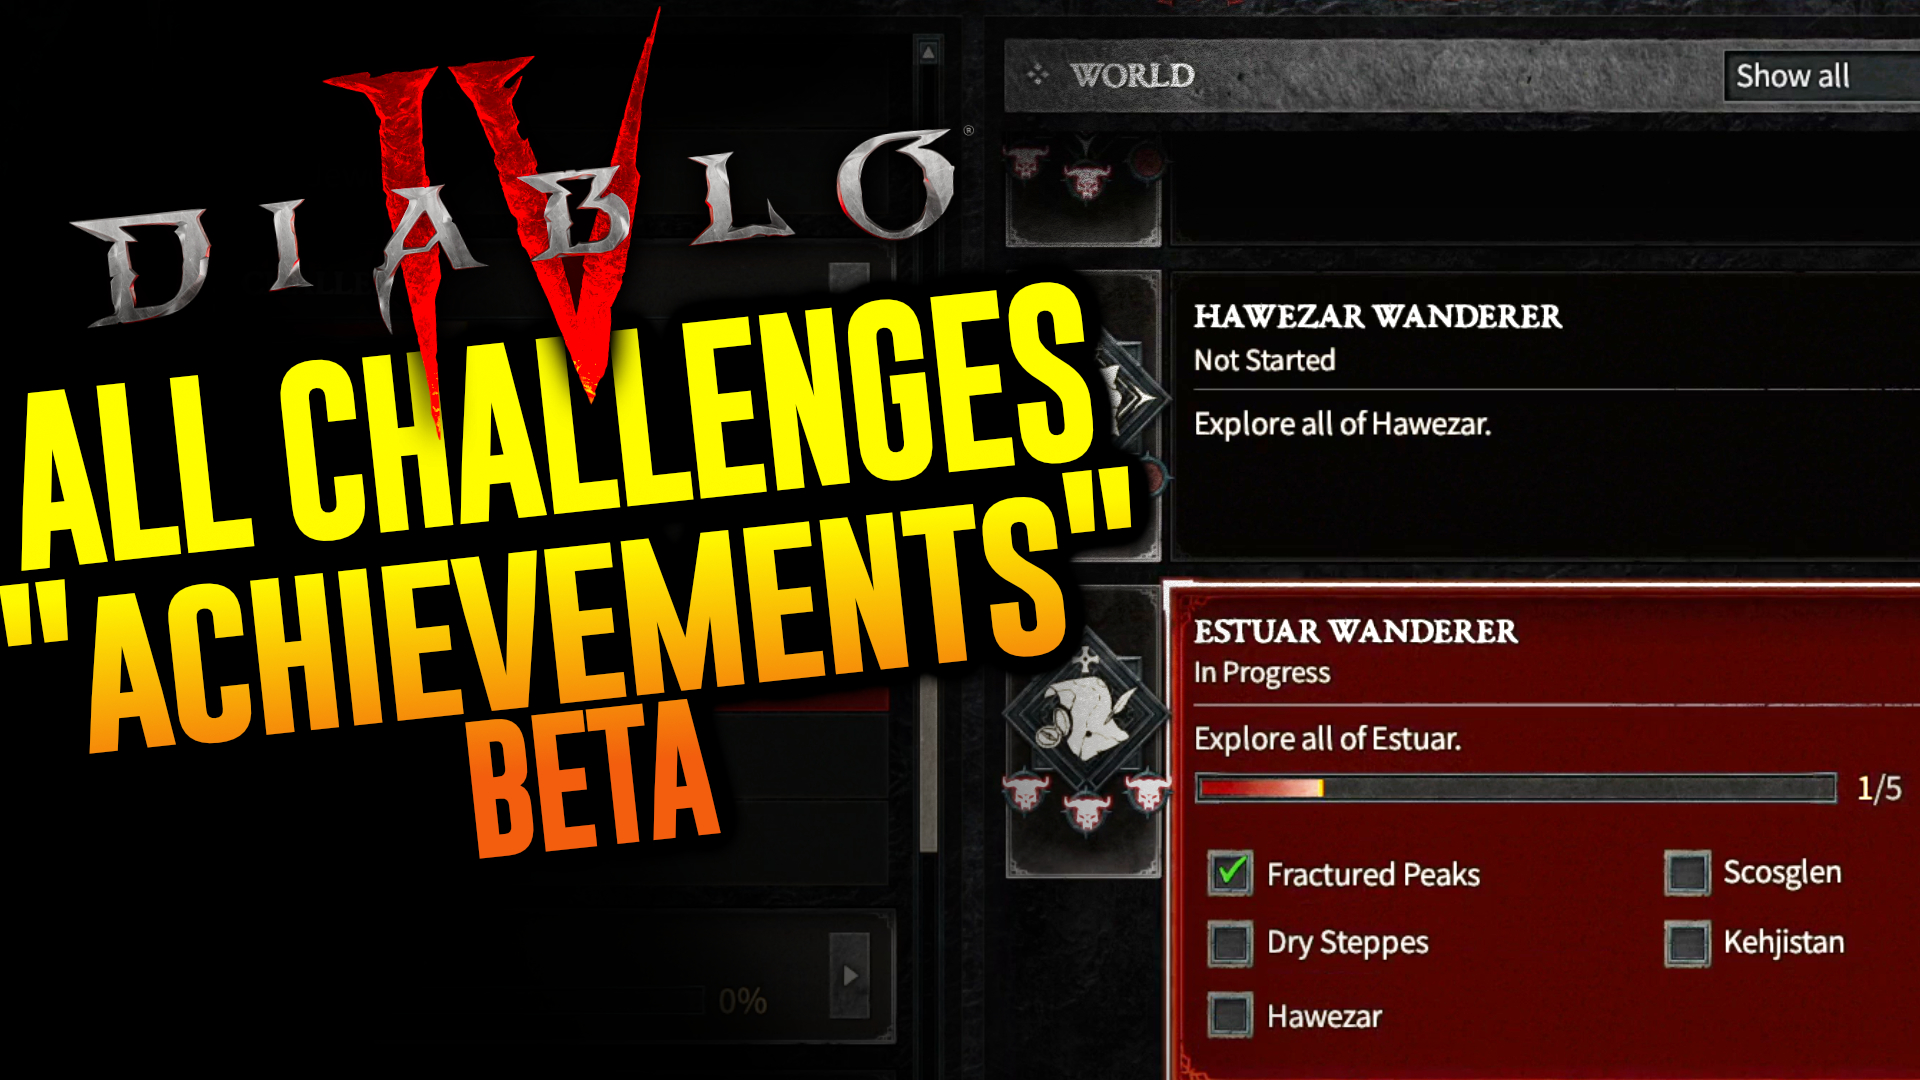 Diablo IV Campaign Acts Leaked in Challenges Tab